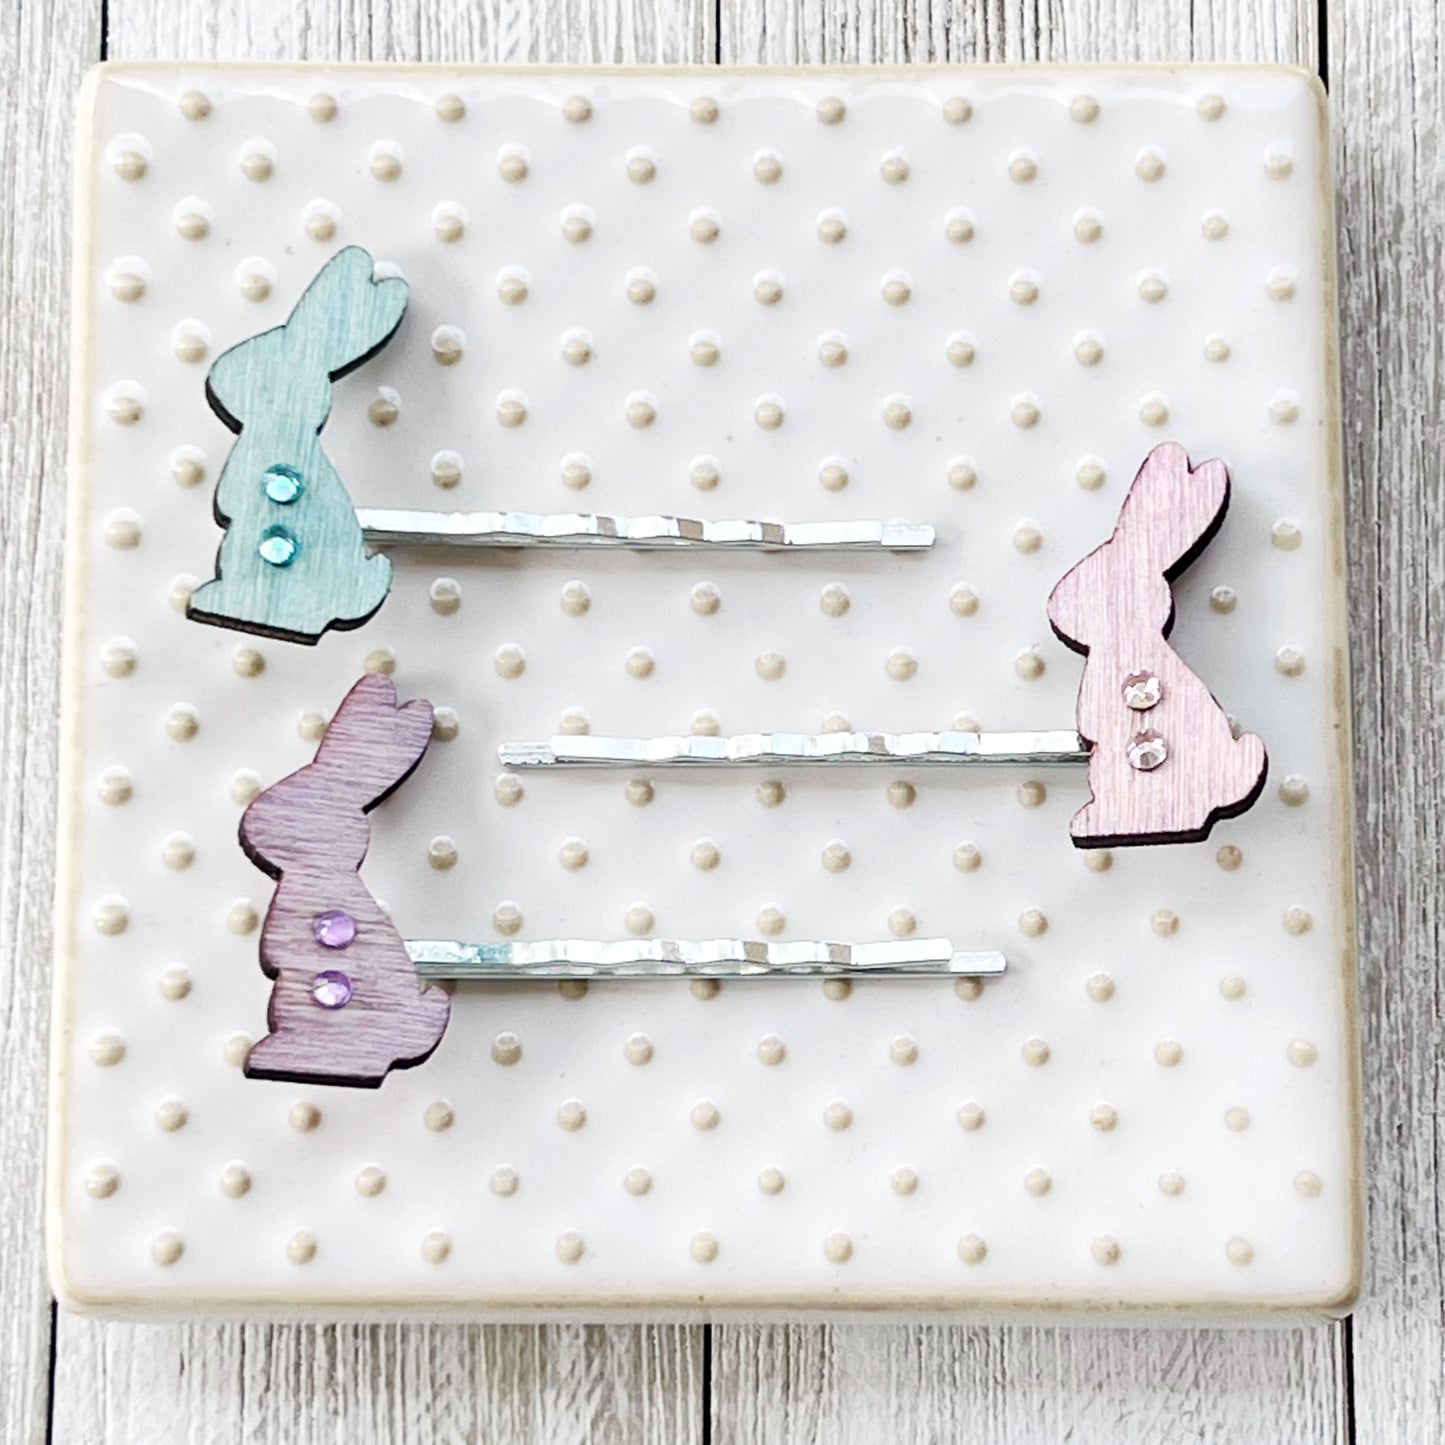 Bunny Rabbit Hair Pins - Easter Hair Accessories | Bunny Bobby Pins for Women's Hairstyles, Set of 3